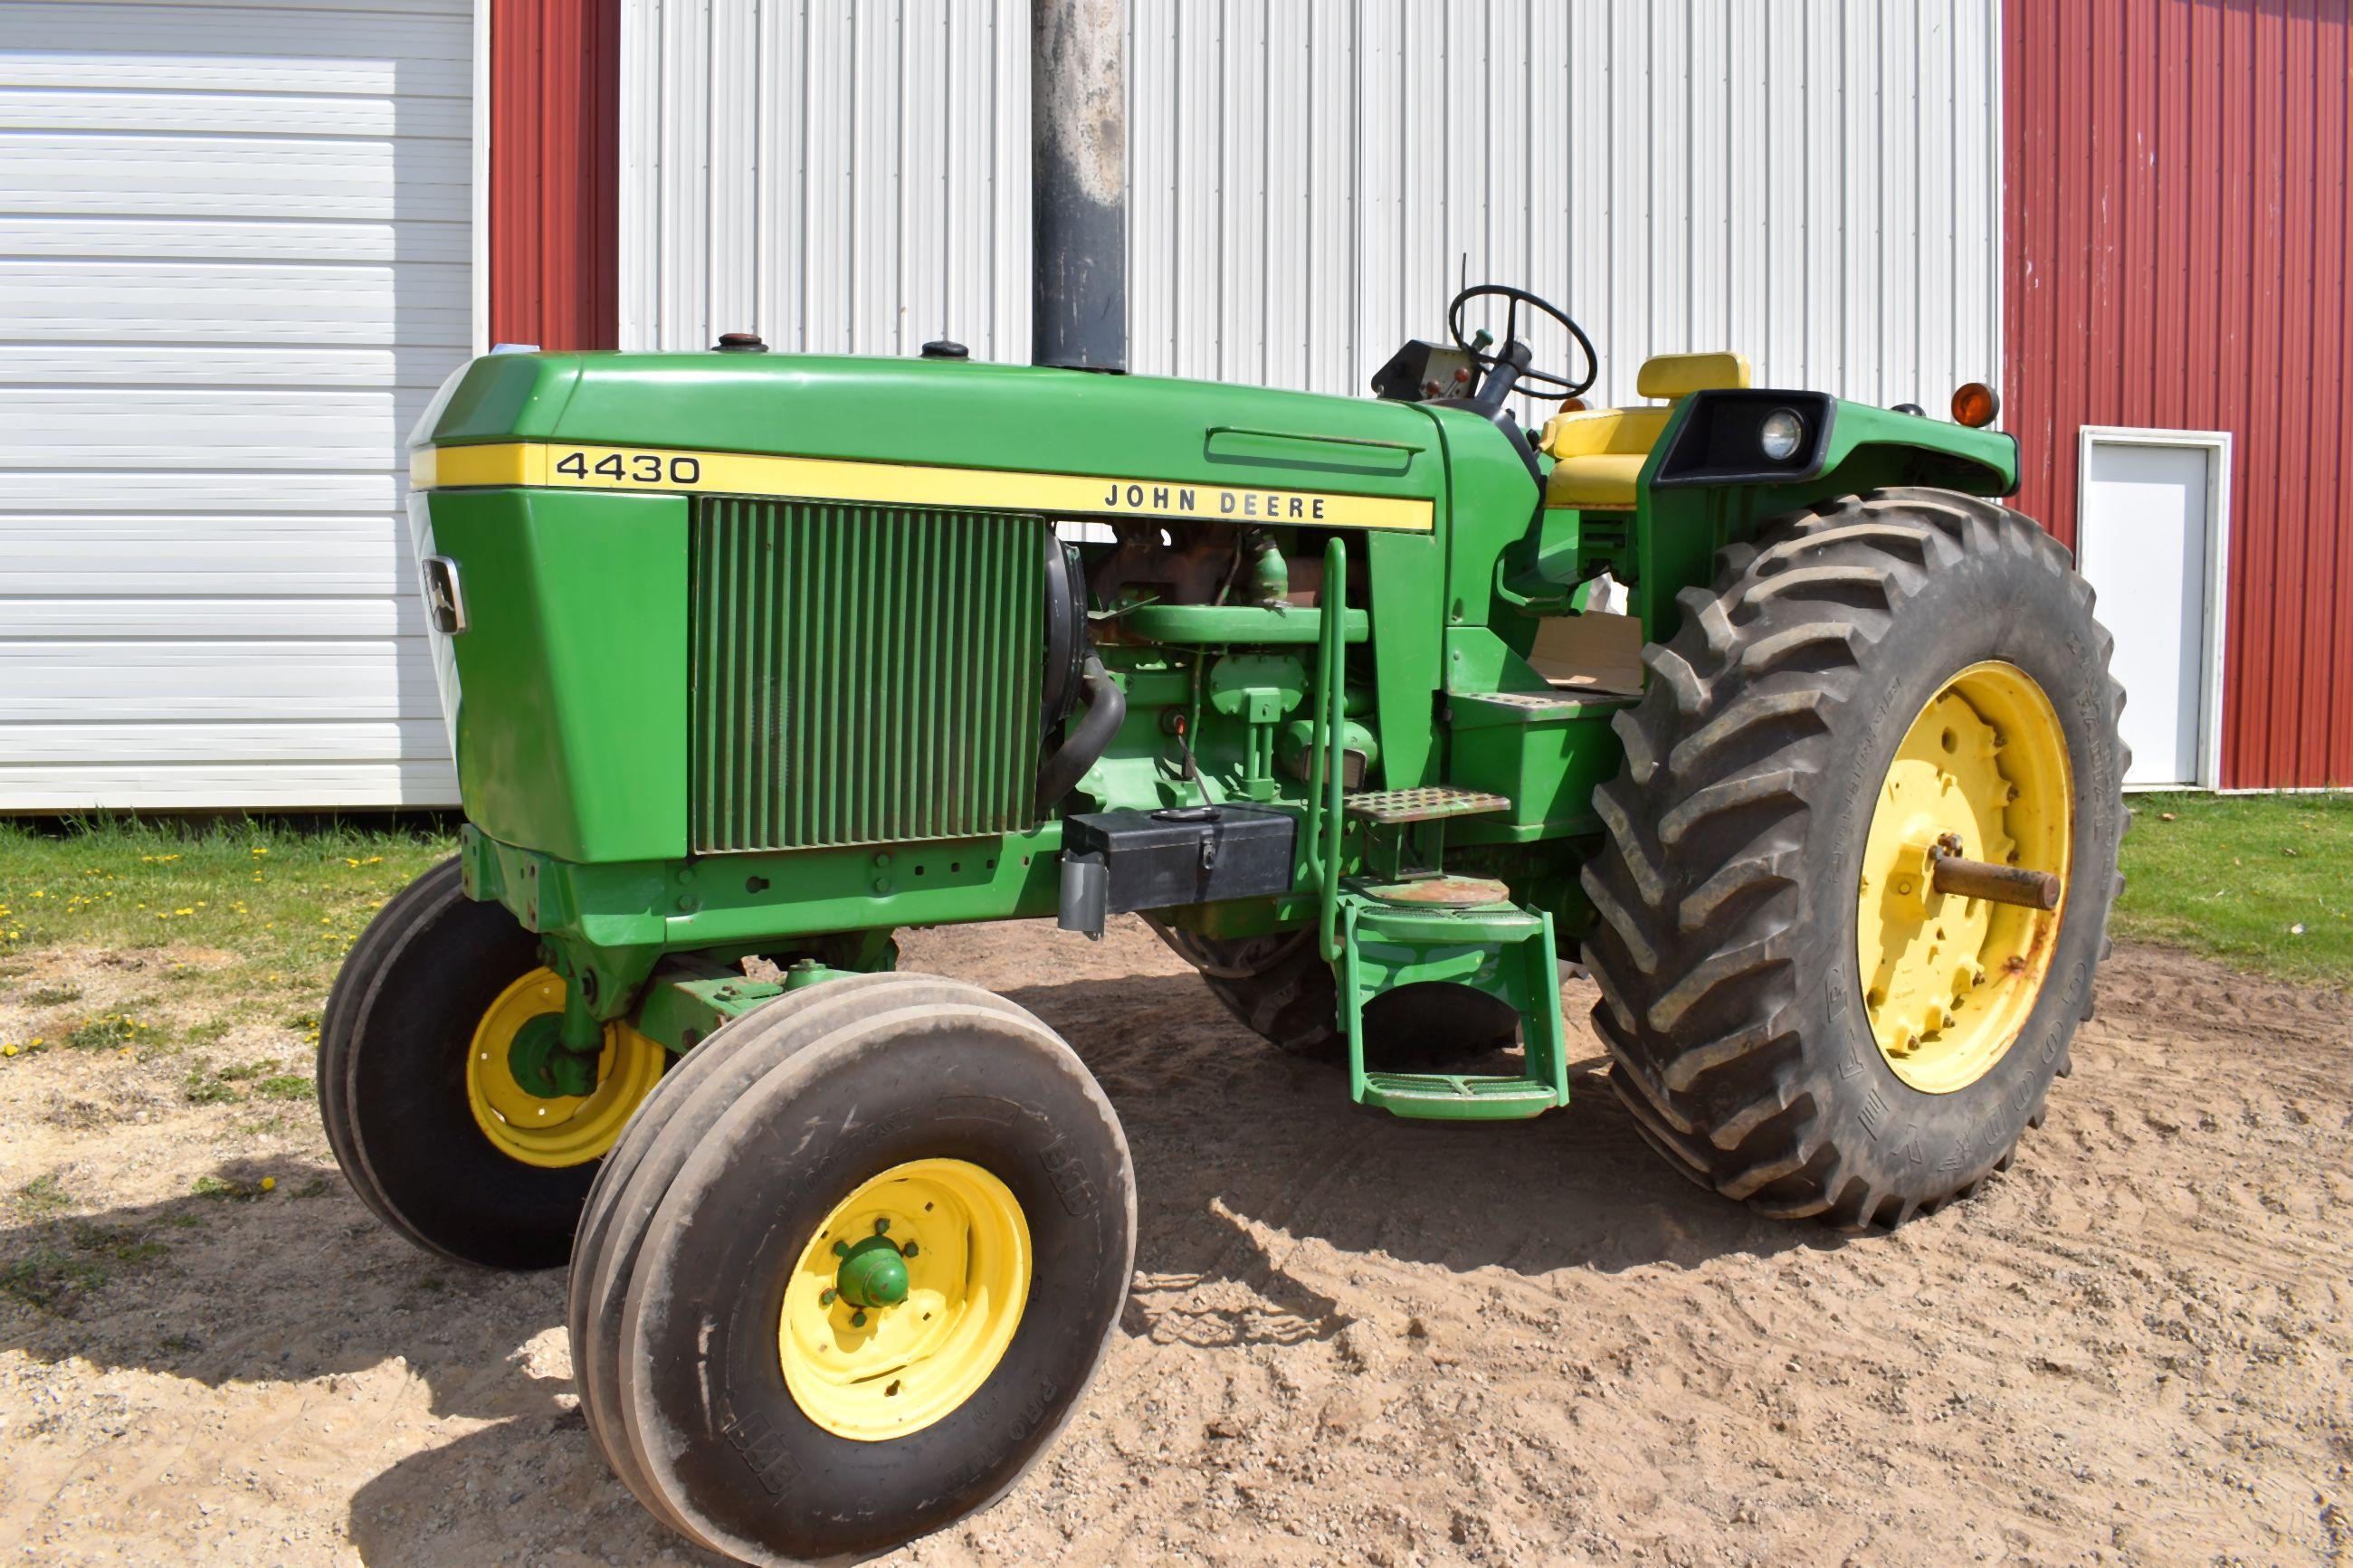 John Deere 4430 2WD Open Station Tractor, 20.8x38 Tires, 2 Hydraulics, 3pt., 540/1000PTO, Like New F